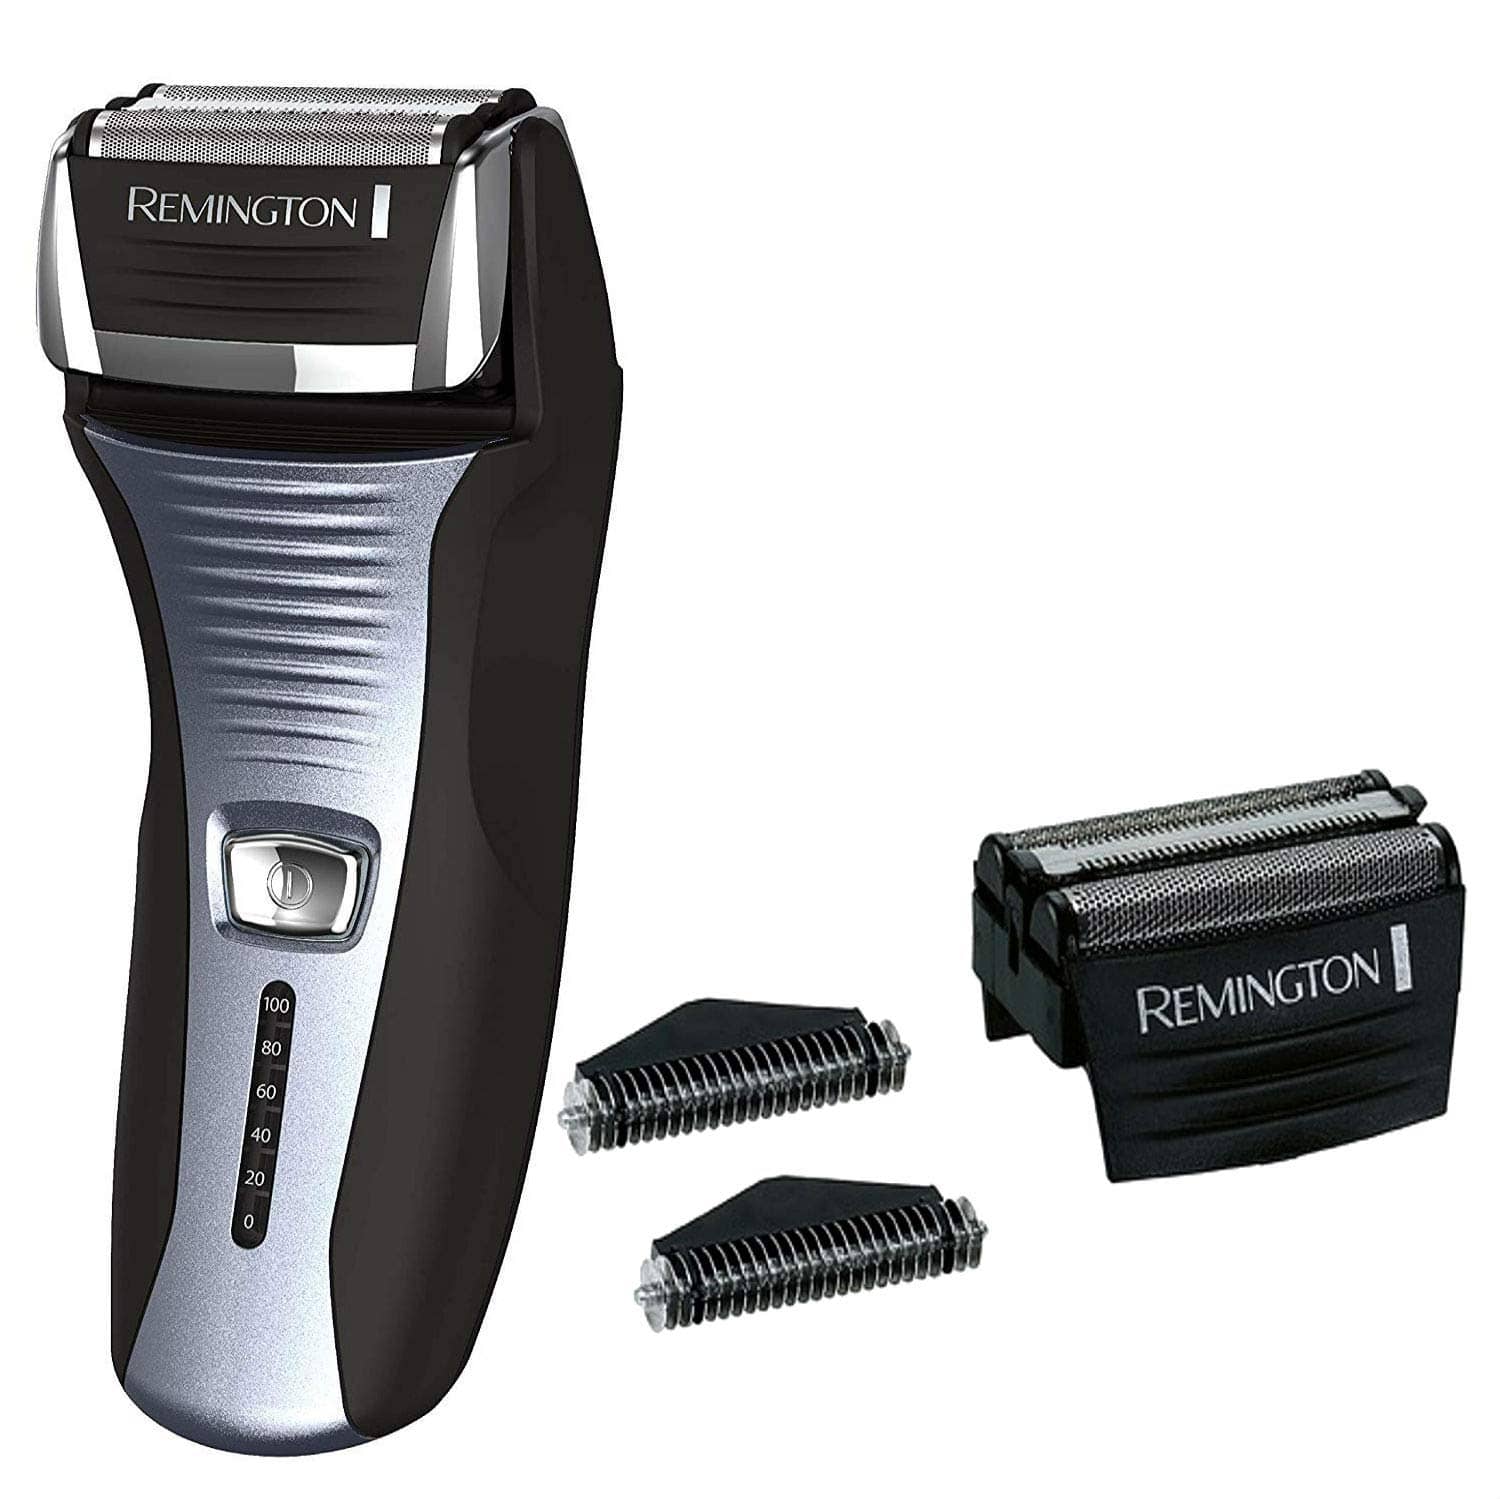 Remington F5-5800, Power Series Inercept Cutting Foil Razor:Men's Shaver with SPF-300 Screens & Cutters, Pivot & Flex Technology, and Stainless Steel Blades